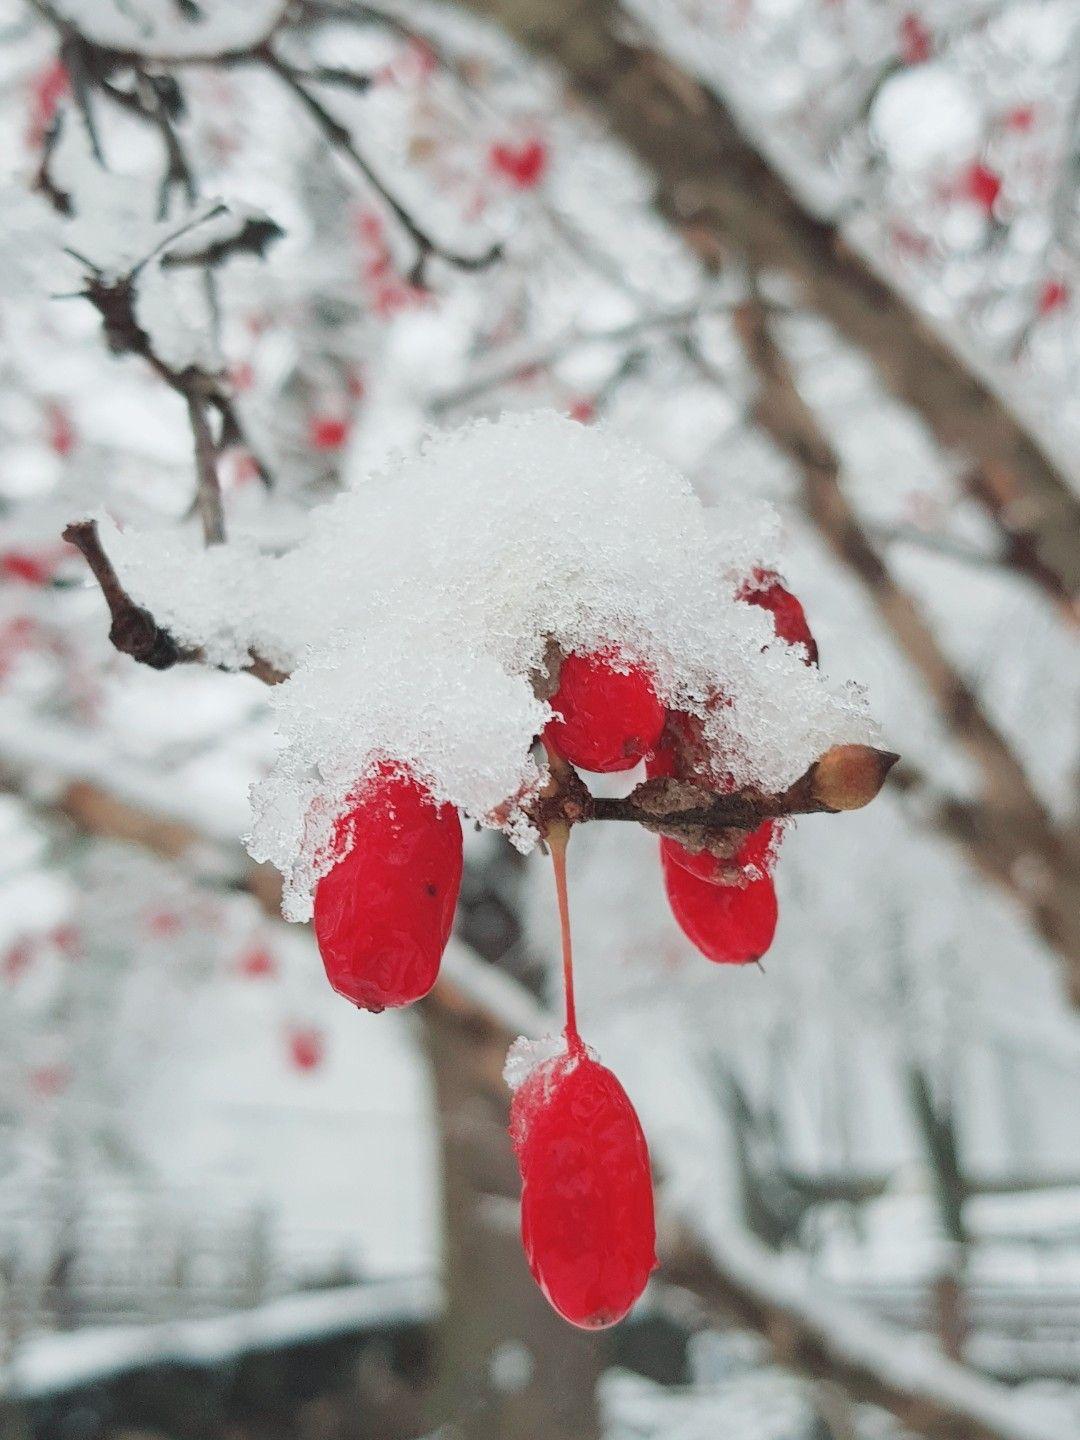 Pop of red #winter #berries #aesthetic Holiday spirit in the nature. First snow in Korea, make a wish darling♡♡♡. Korea wallpaper, Snow in korea, Aesthetic korea